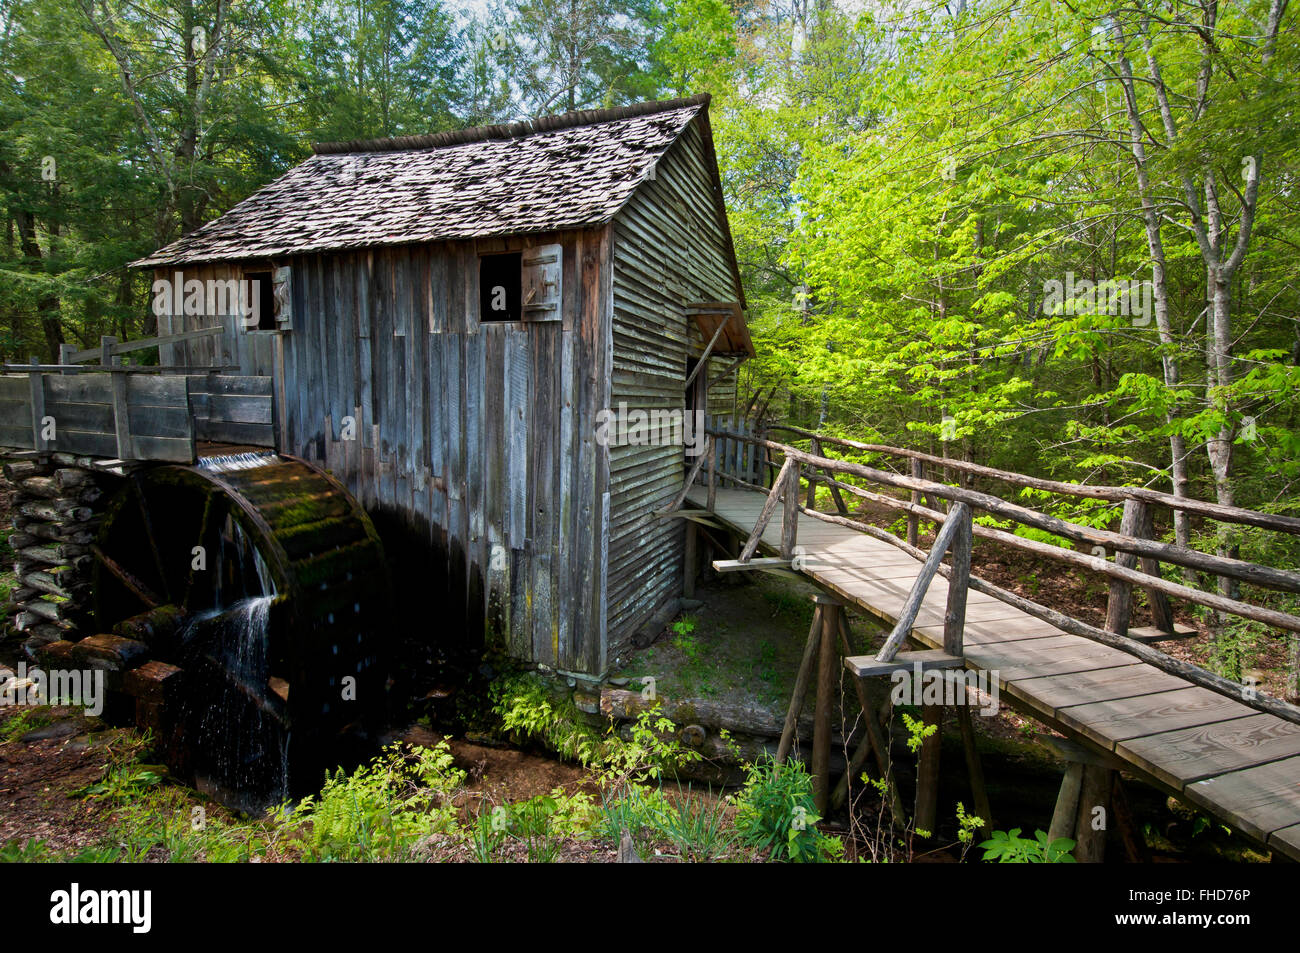 The John Cable Mill is an historic attraction at Cades Cove in Great Smoky Mountains National Park, Tennessee, USA. Stock Photo